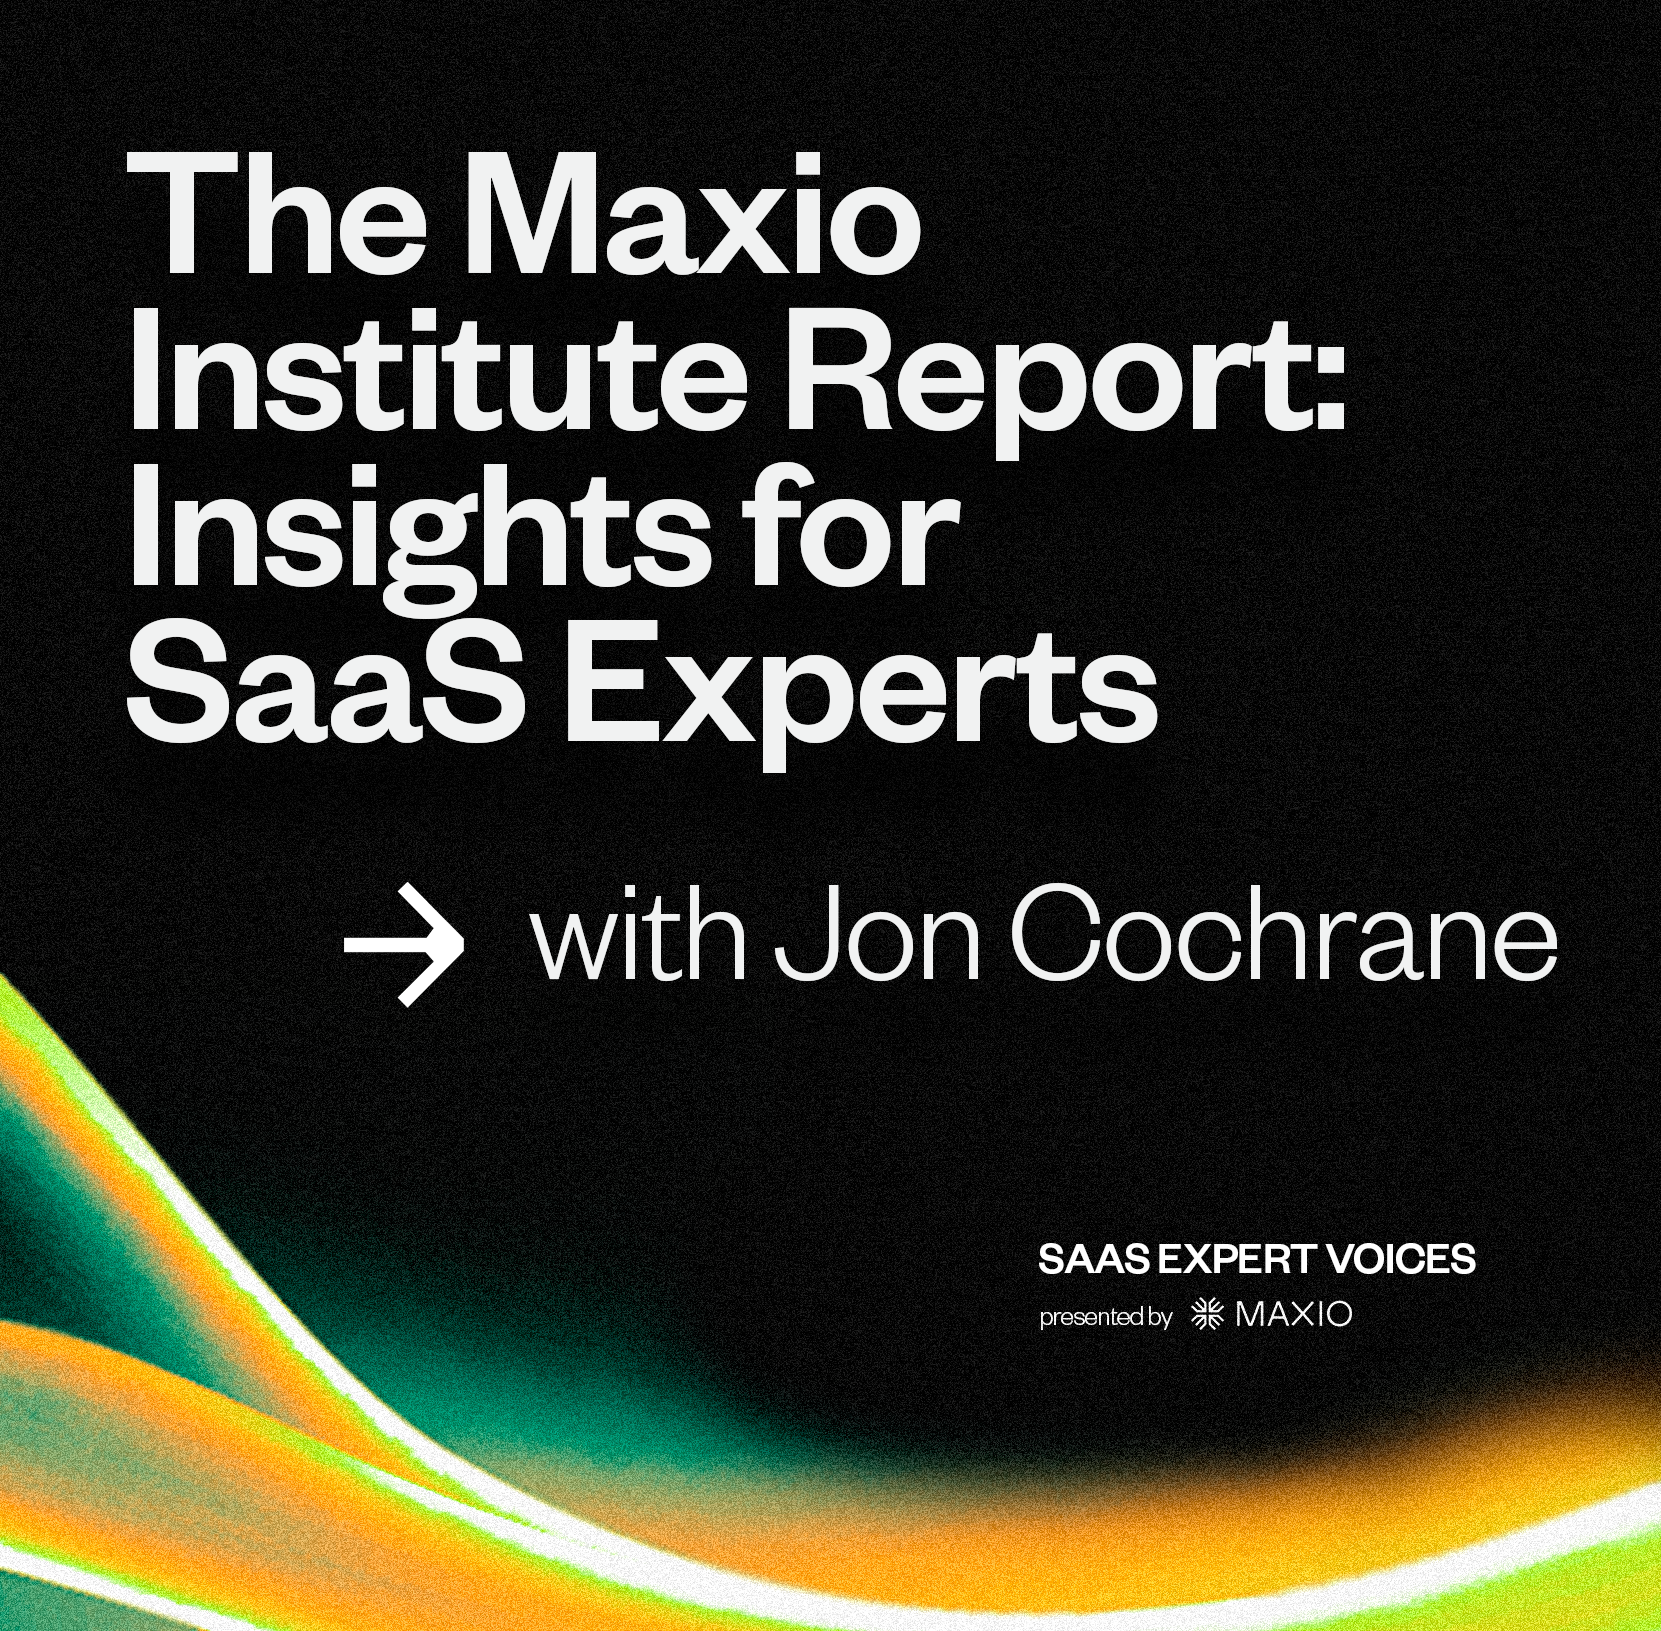 This week on the Expert Voices podcast, Randy Wootton, CEO of Maxio, speaks with Jon Cochrane, VP of Strategy at Maxio and Director of the Maxio Institute, to discuss the Maxio Institute Growth report and the future of the Maxio Institute. Randy and Jon delve into key insights from the report, including the resilience of B2B businesses and the impact of the pandemic on different industries. They discuss how data can drive growth and inform business strategies and the challenges faced by sales and marketing tech companies amid competitive pressures and shifting budgetary priorities. Listen as they explore the unique paths to growth among small SaaS businesses, emphasizing the importance of predictable invoicing and cash management.